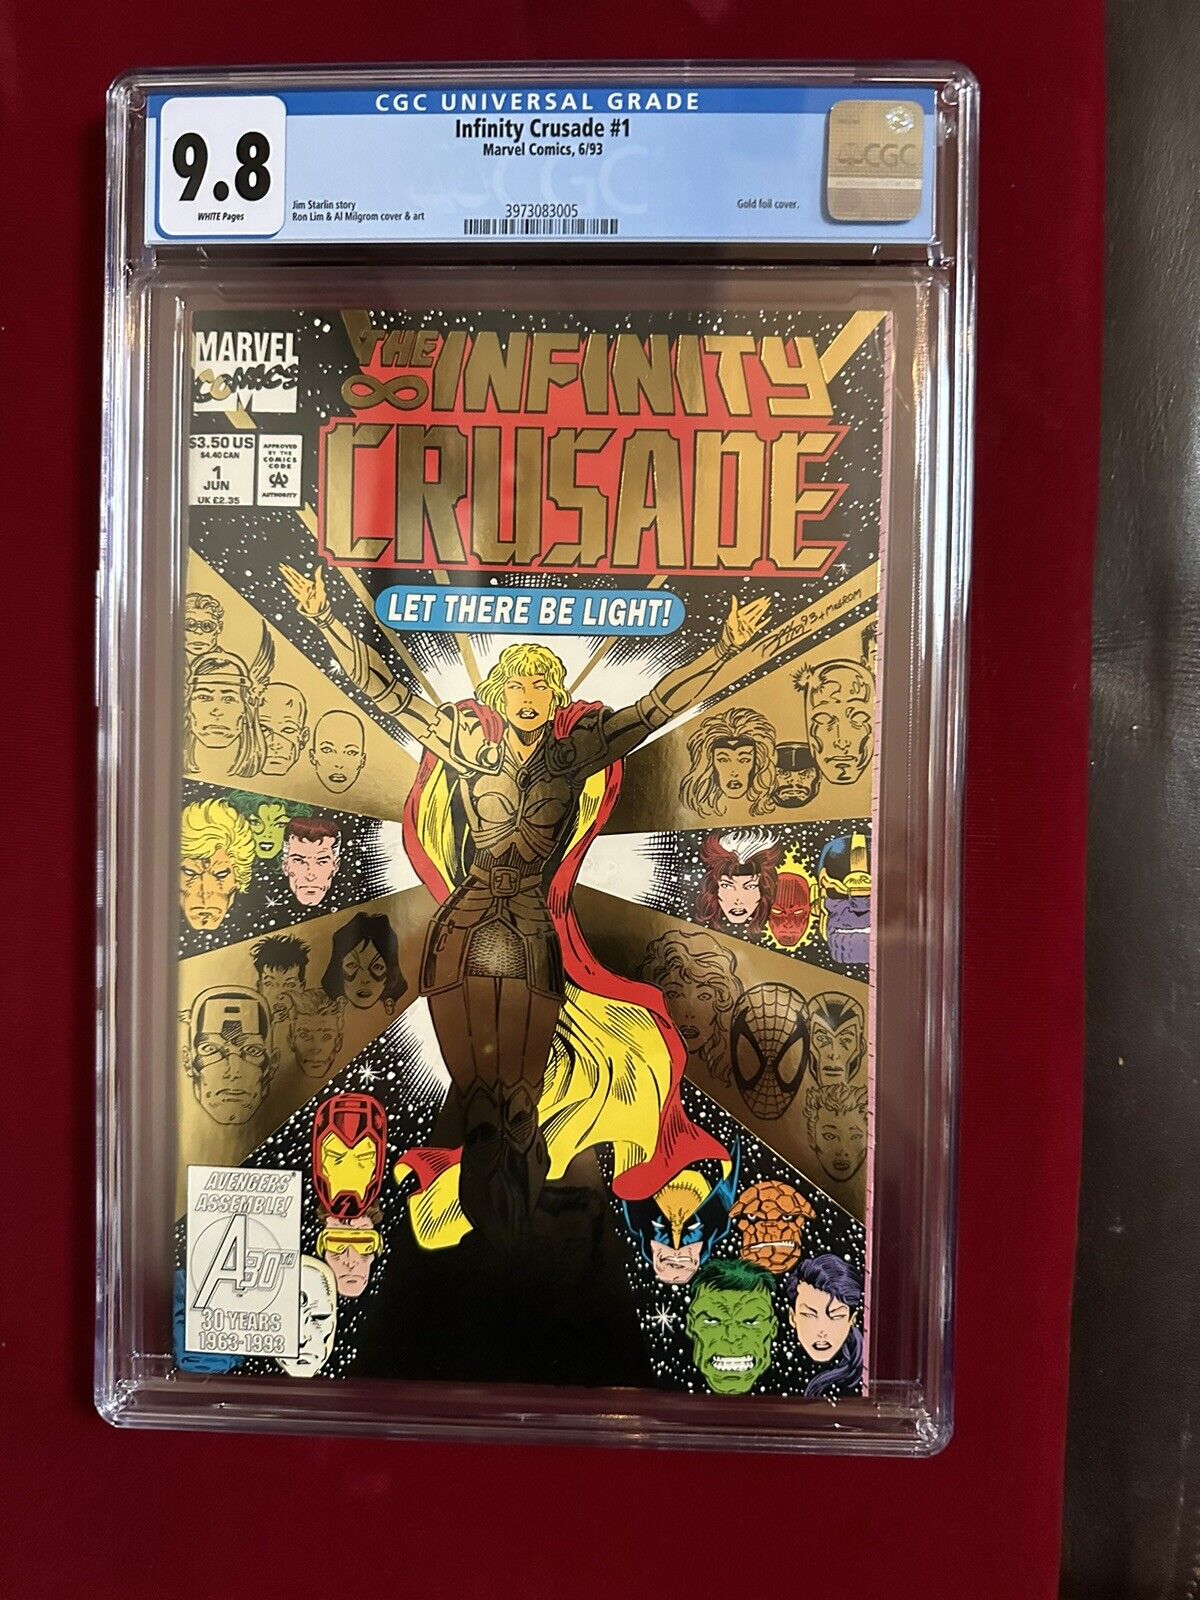 Infinity Crusade #1 Marvel Comics CGC 9.8 (6/93) White Pages Gold Foil Cover